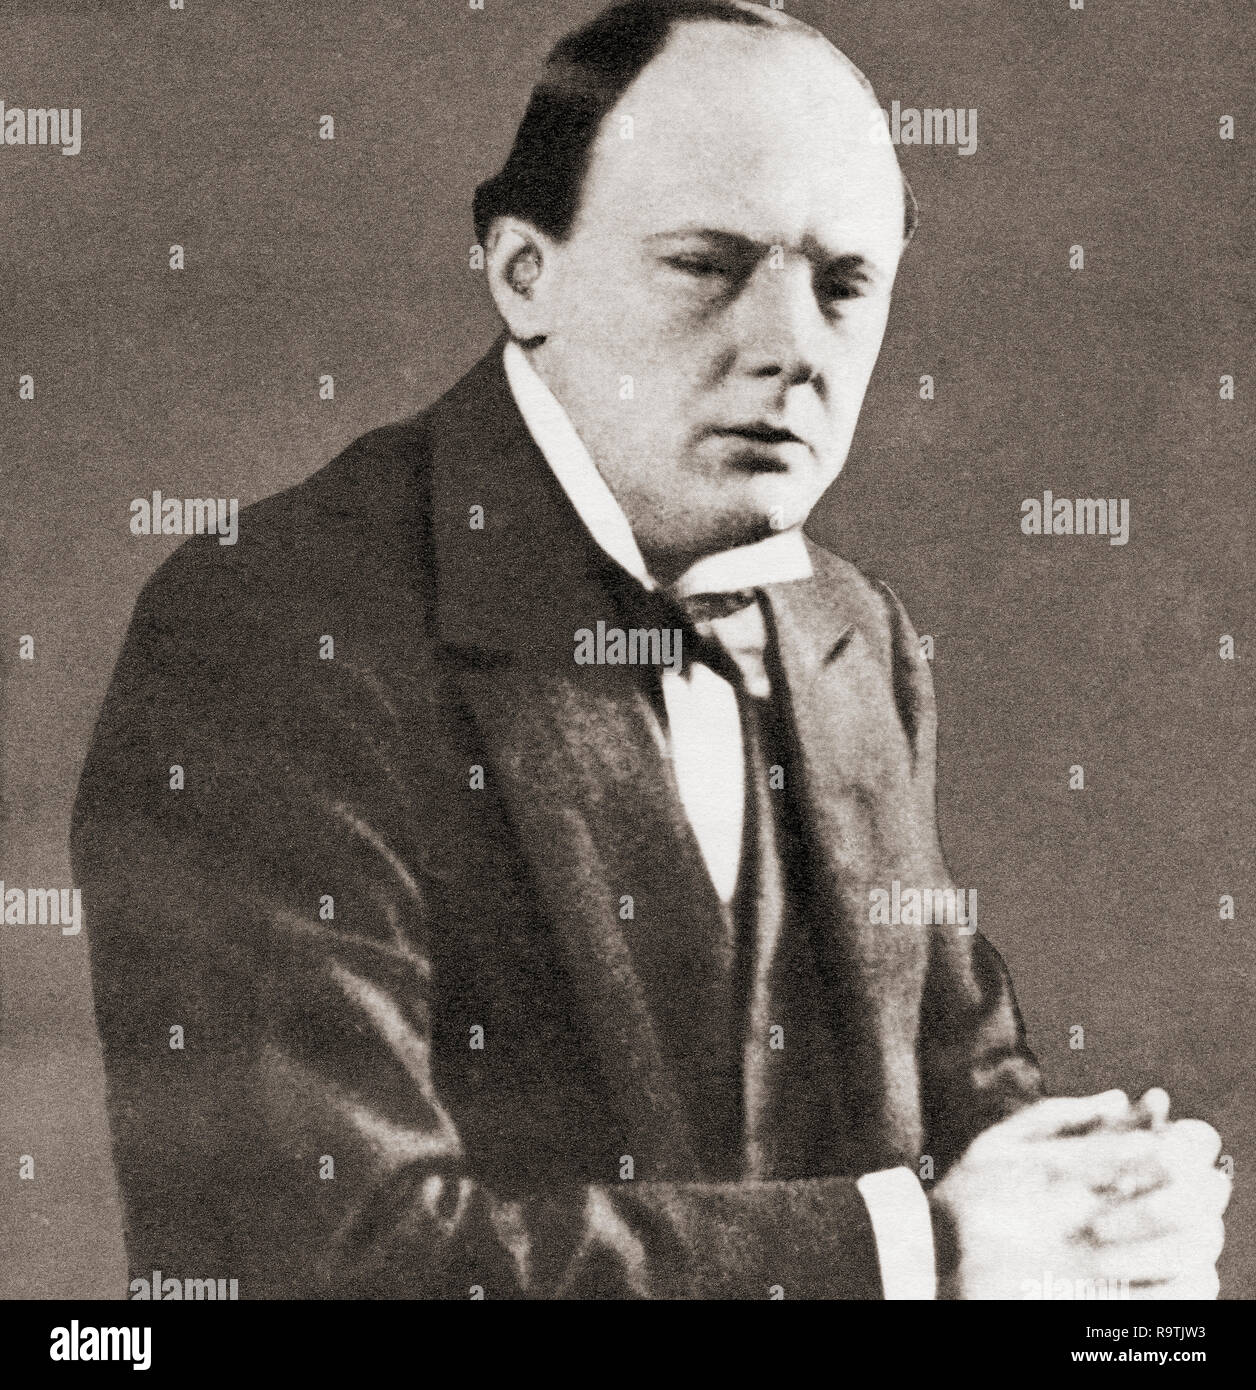 Winston Churchill seen here in 1911 giving evidence at the enquiry after the Sidney Street affair.  Sir Winston Leonard Spencer-Churchill, 1874 –1965. British politician, statesman, army officer, and writer, who was Prime Minister of the United Kingdom from 1940 to 1945 and again from 1951 to 1955. Stock Photo